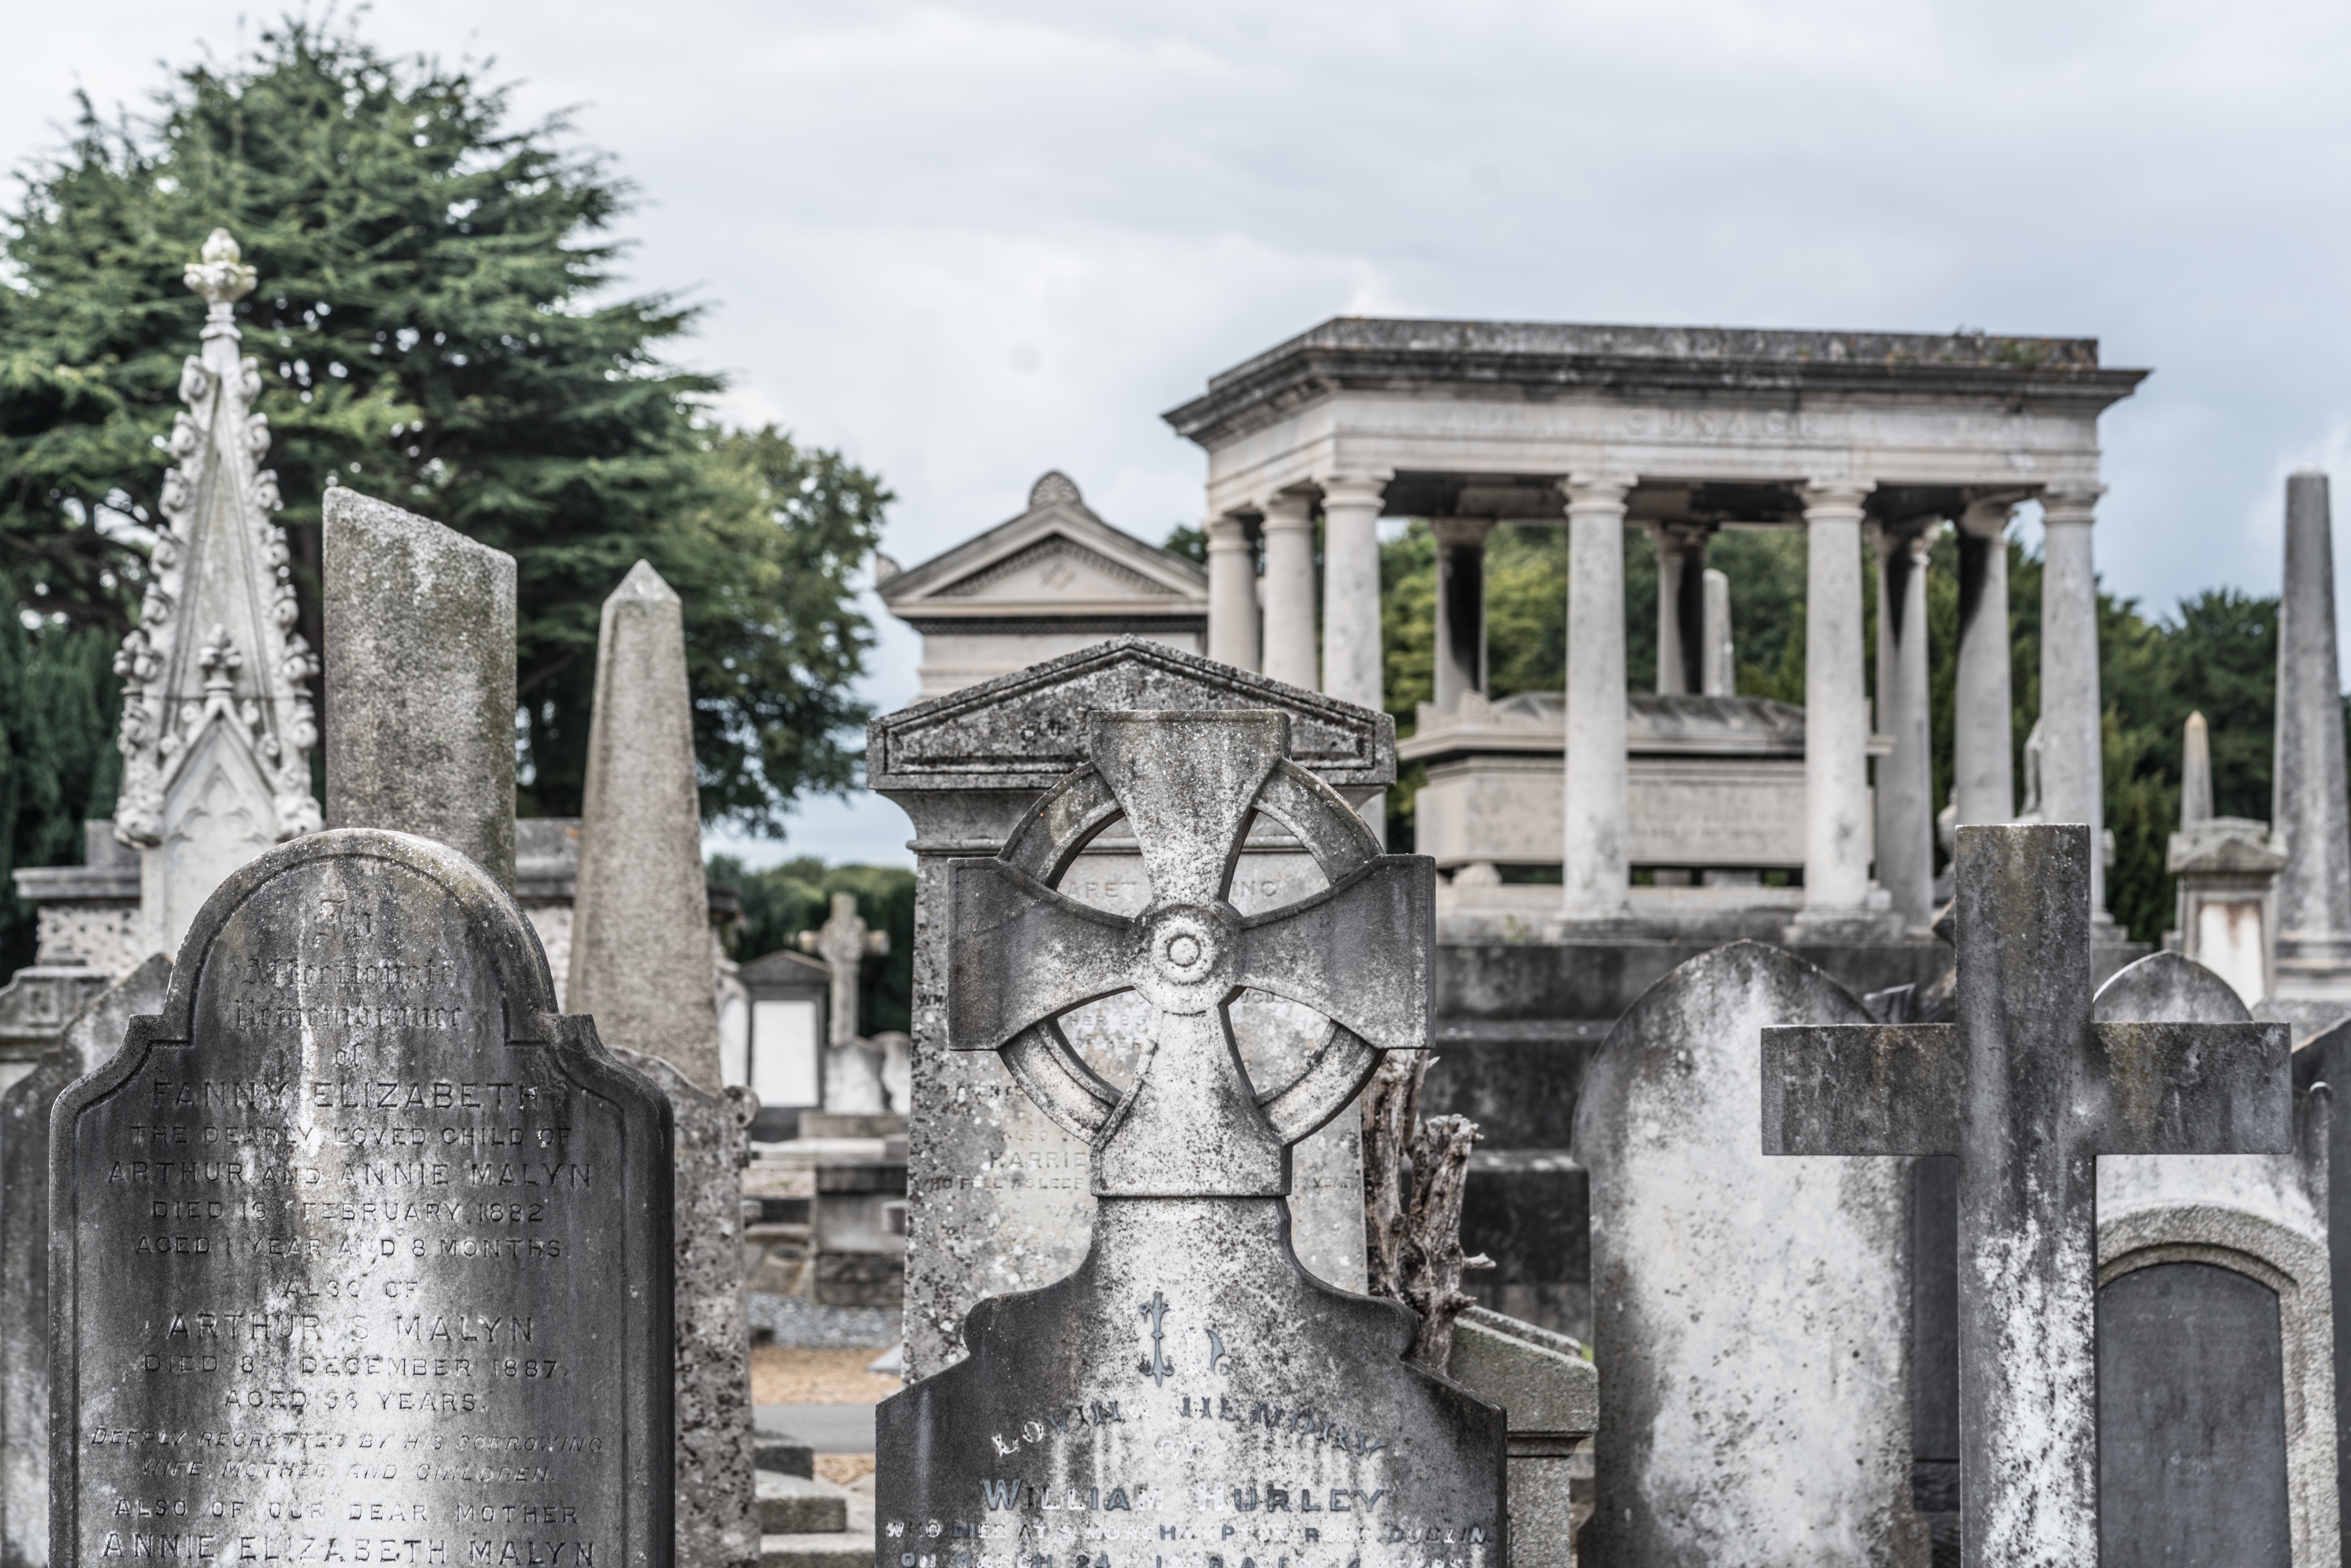  Mount Jerome Cemetery - August 2017 012 